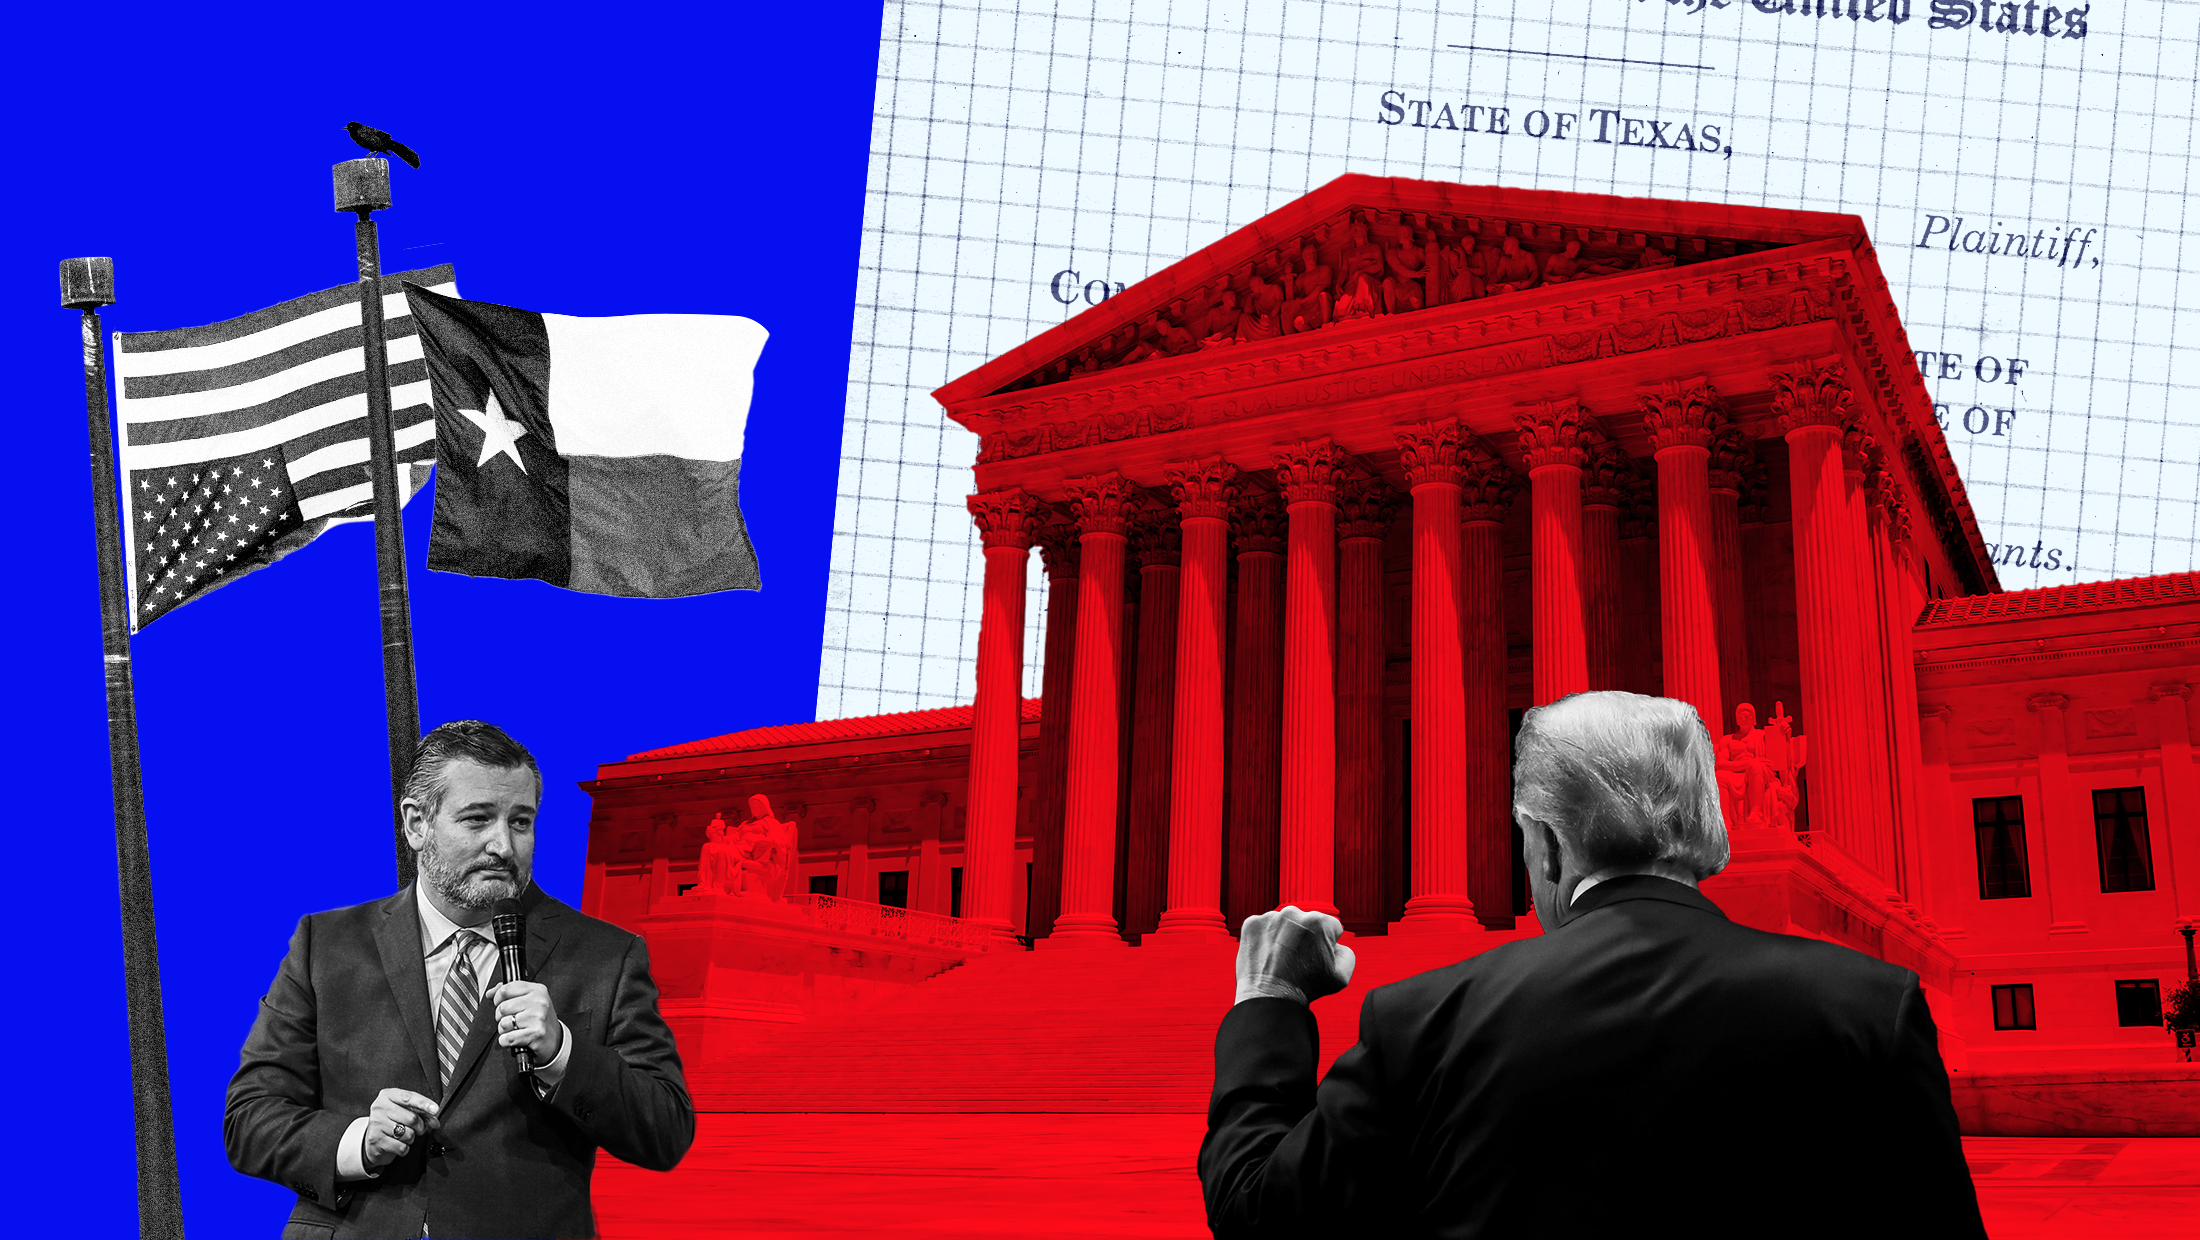 Blue background with a red-toned image of the U.S. Supreme Court, the court document for Texas v. Pennsylvania, an image of Ted Cruz and Donald Trump, the US flag turned upside down and the Texas flag waving next to each other.